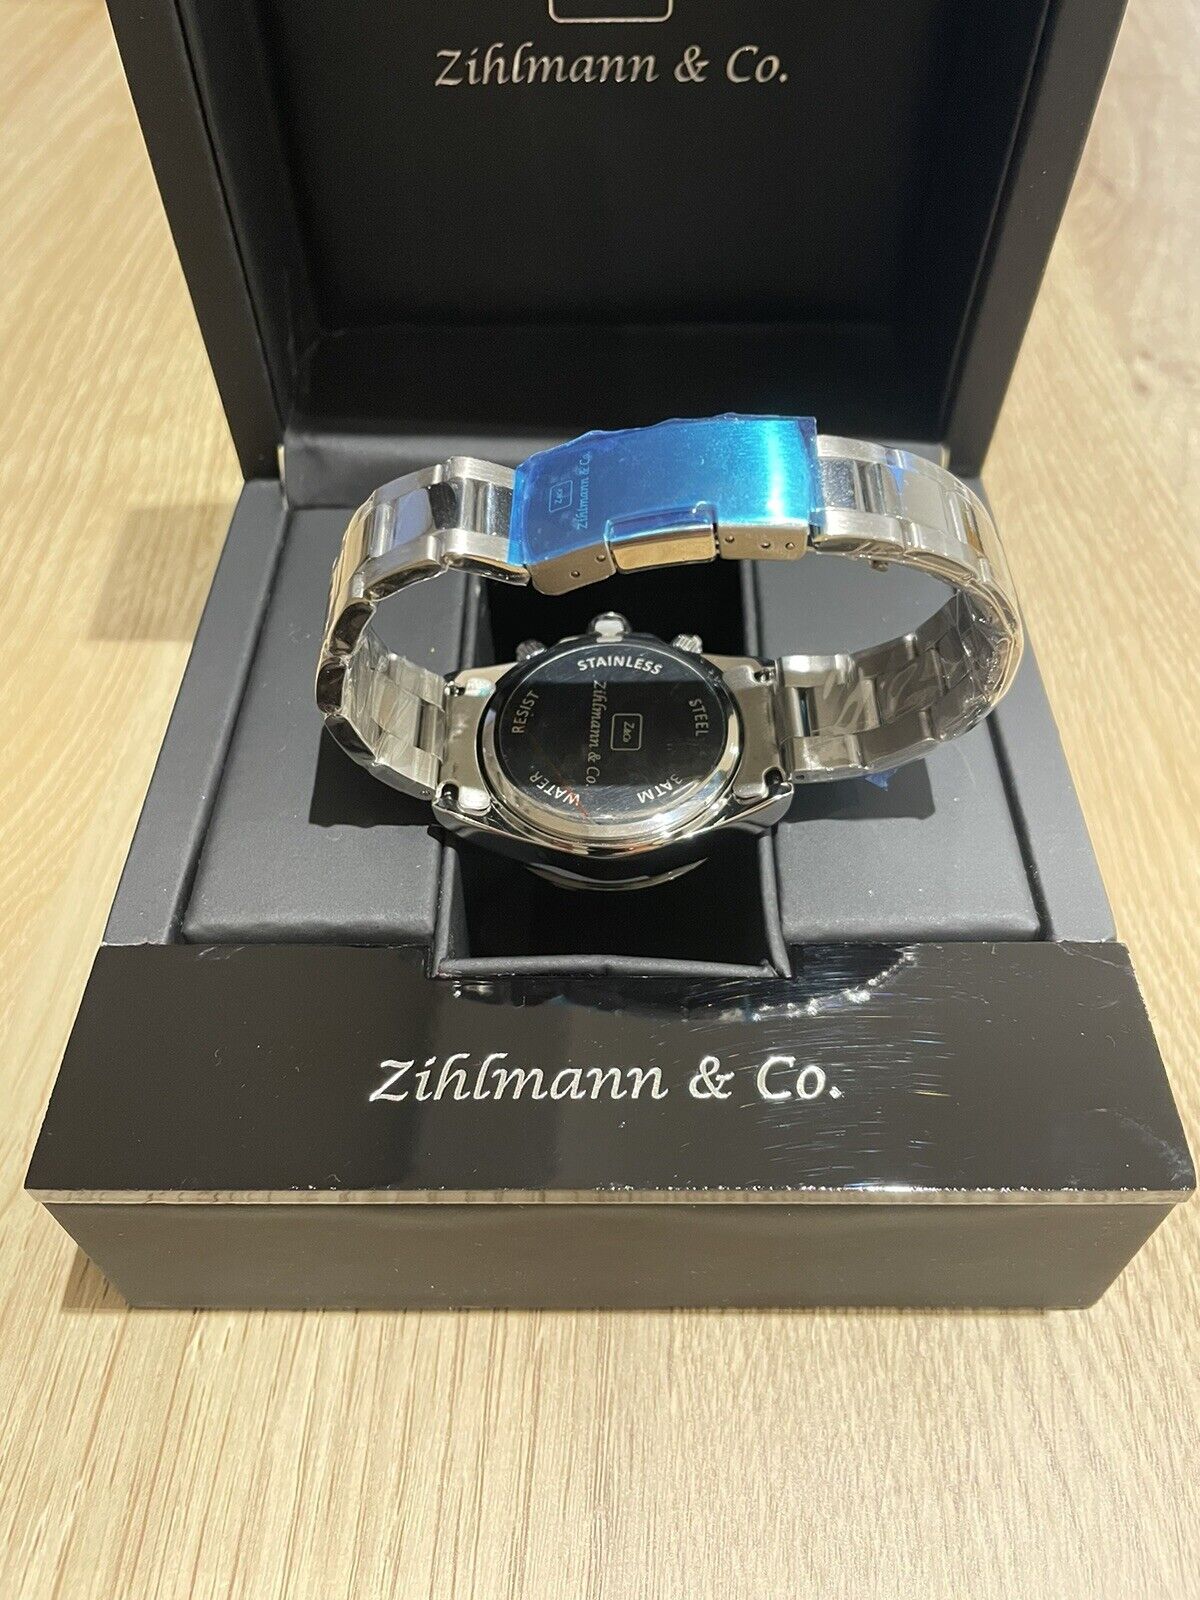 MENS ZIHLMANN & Co Z400 WATCH – CHRONOGRAPH MOVEMENT – STAINLESS STEEL STRAP - Westies Watches